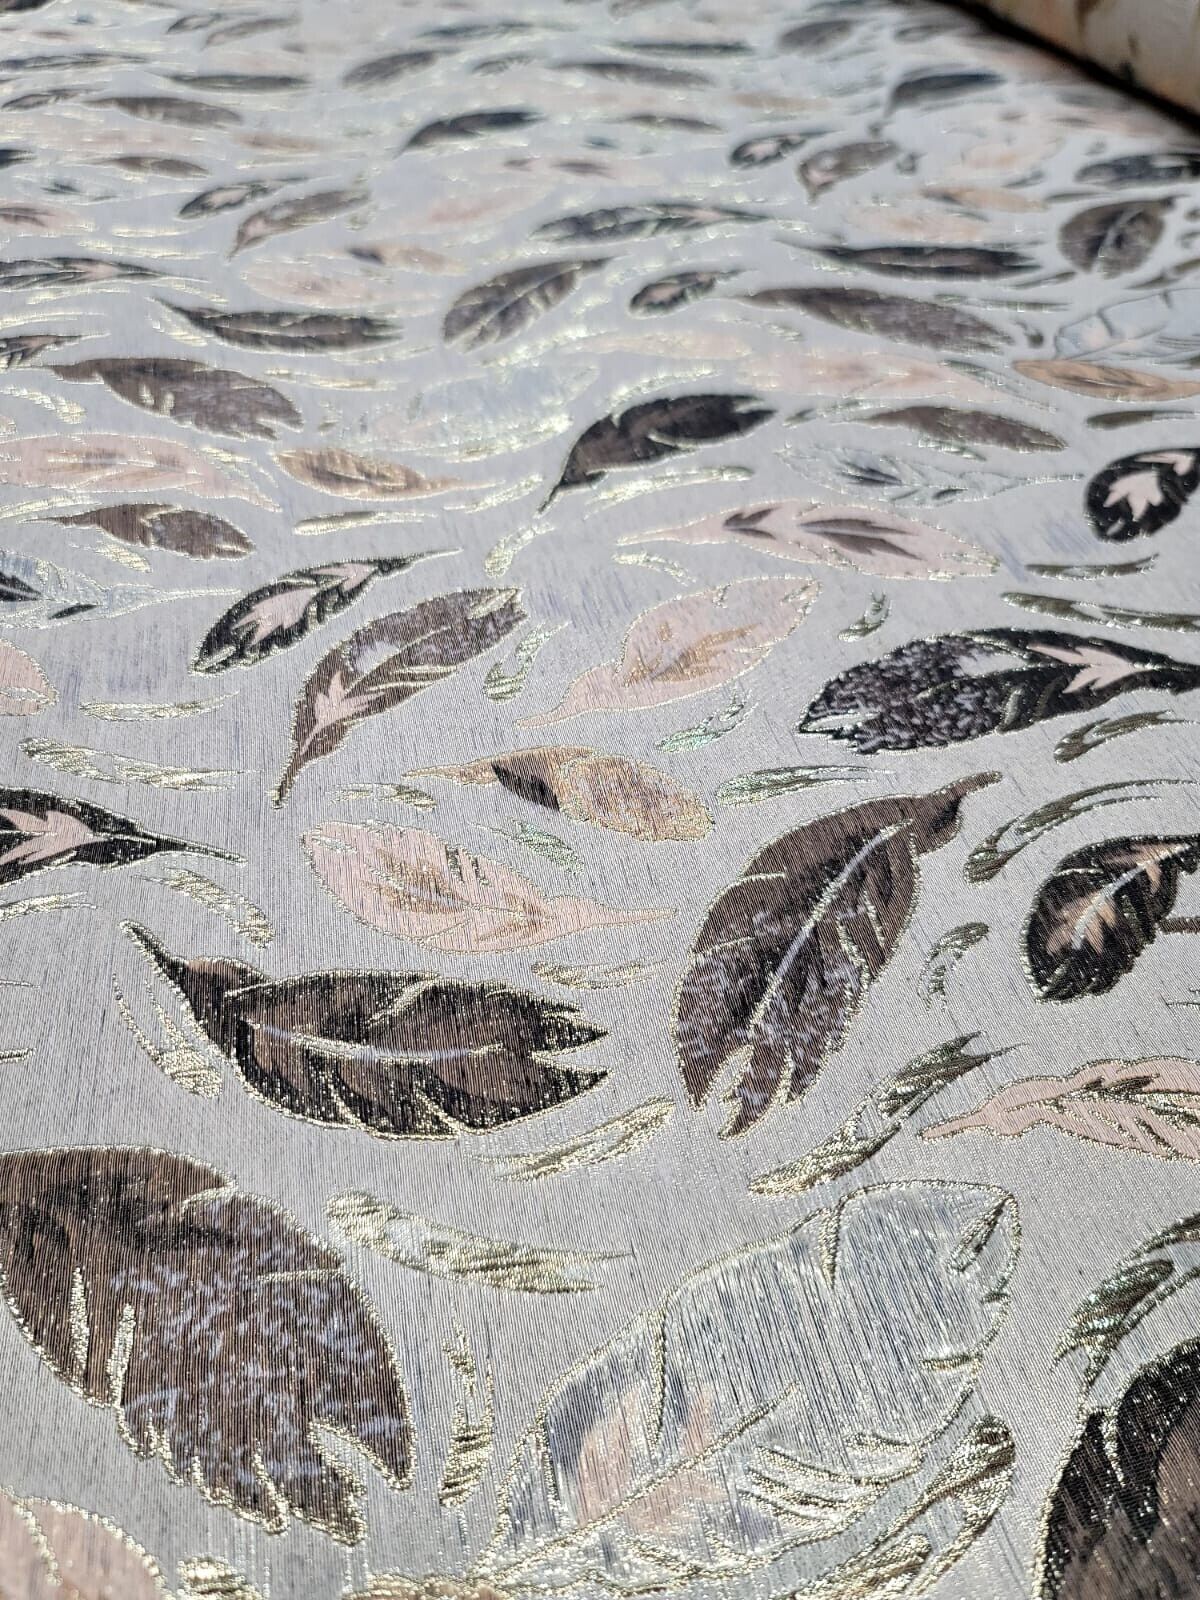 Beige Brocade Metallic Brocade Fabric Sold By The Yard Blush Leaves For Dress